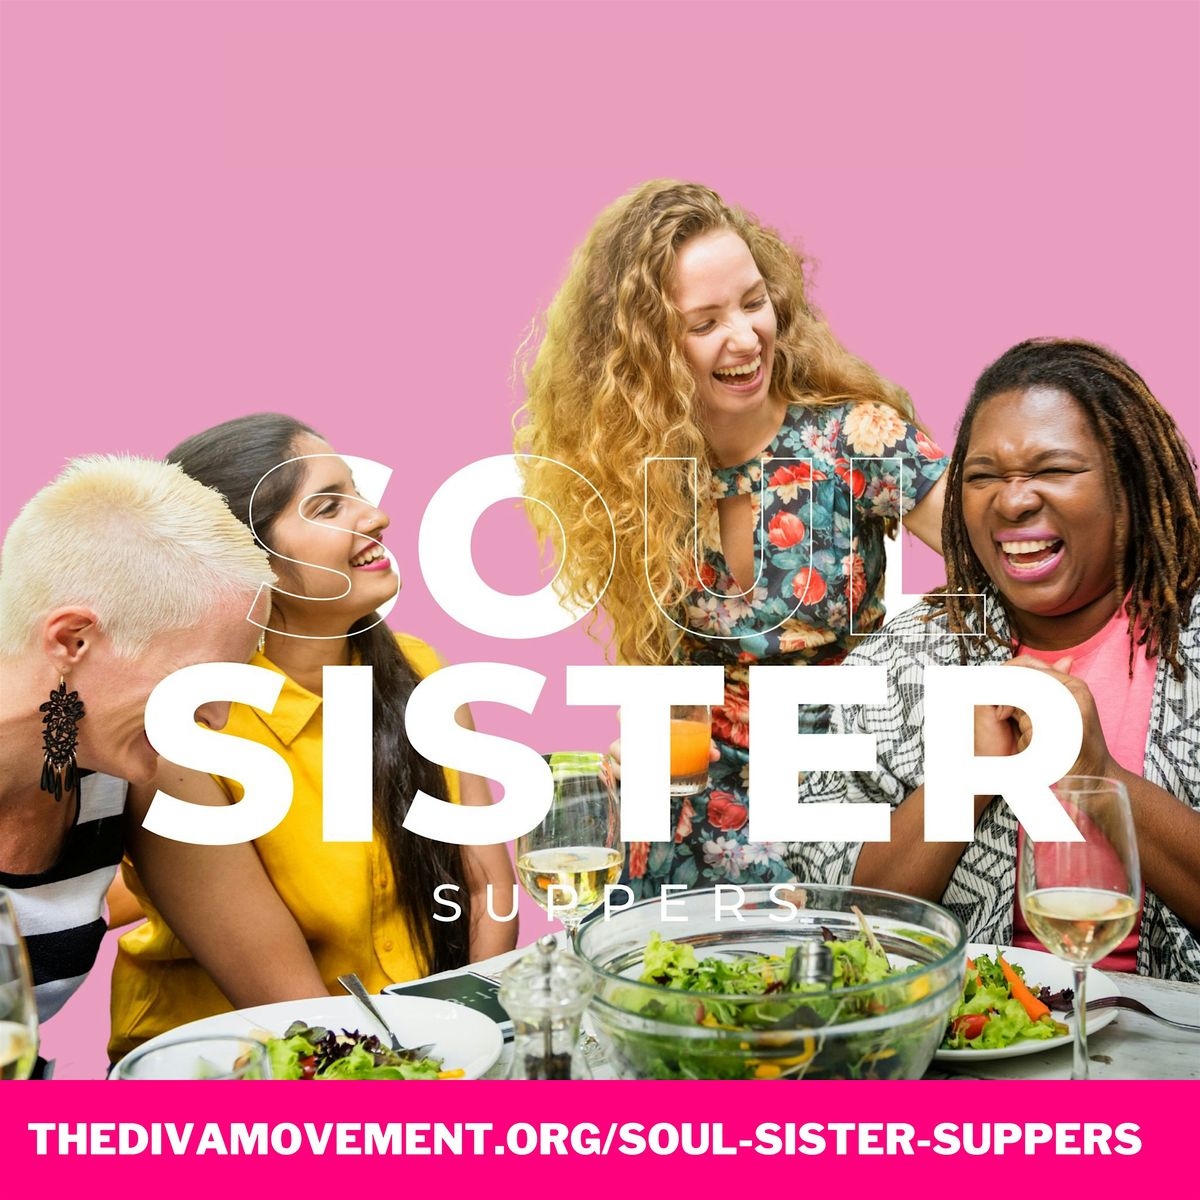 The Soul Sister Suppers